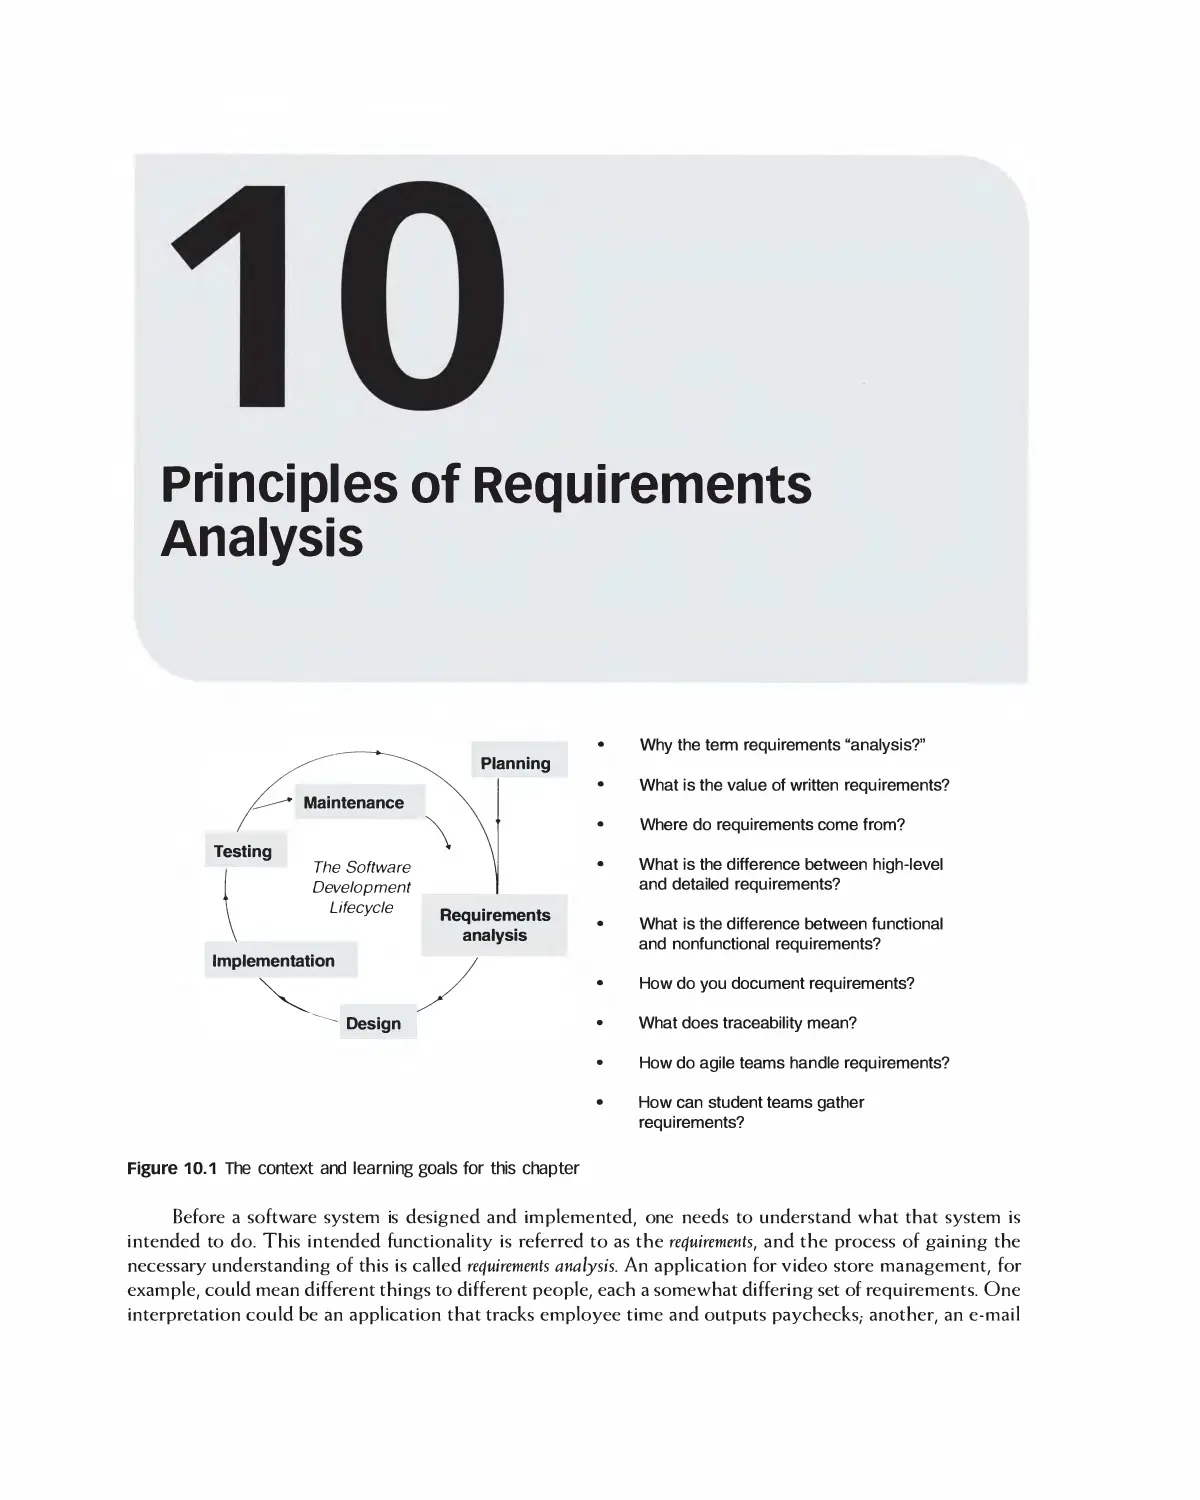 PART IV: Requirement Analysis